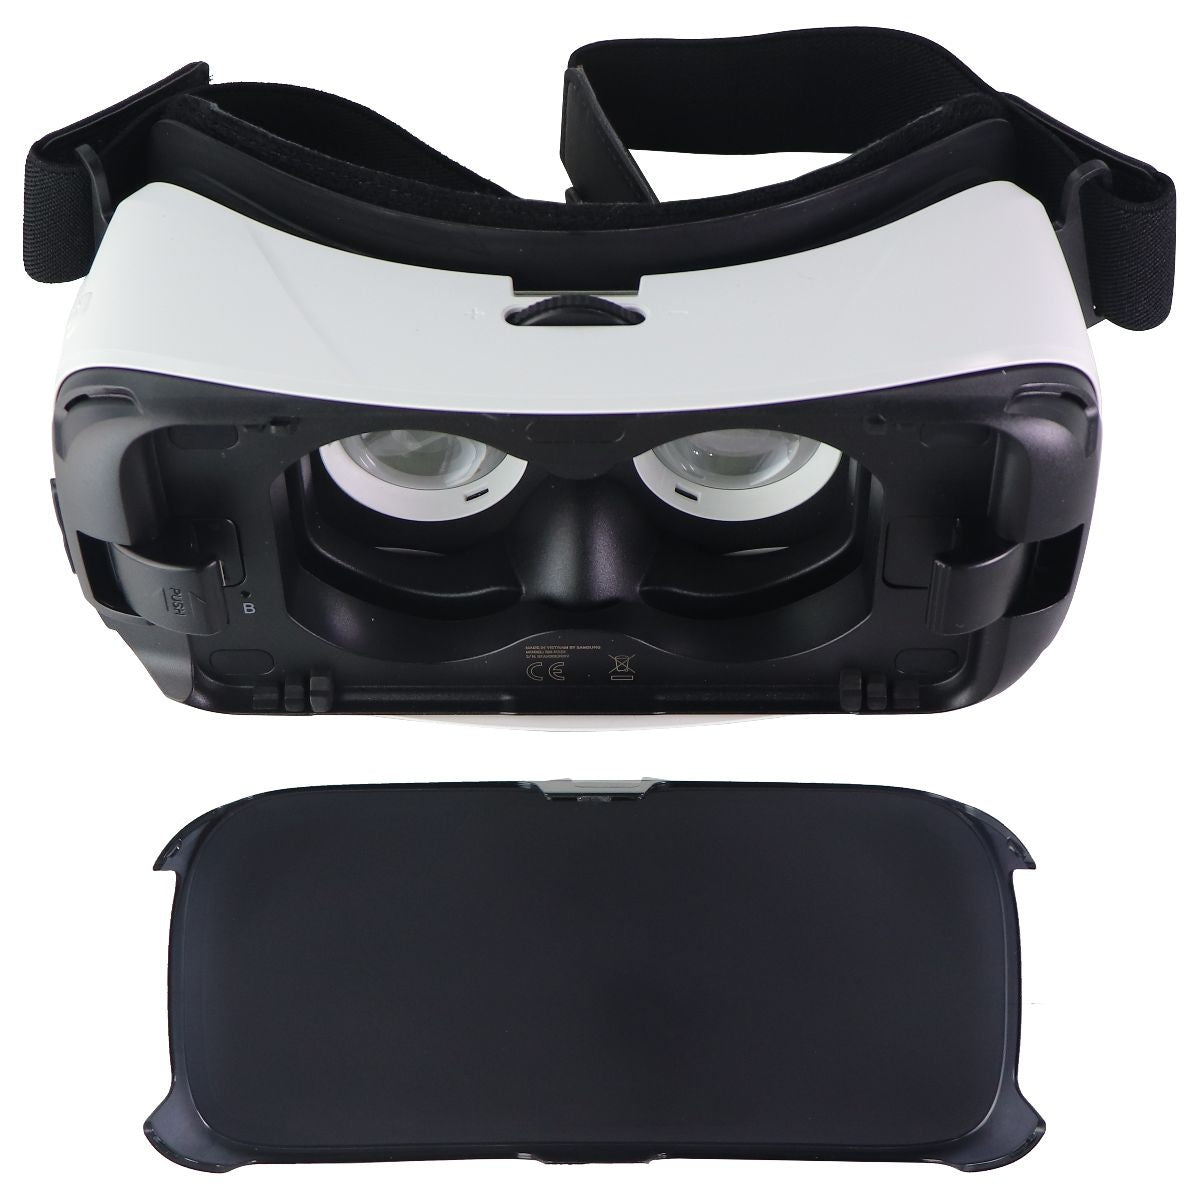 Samsung Gear VR (2015) Headset for Note5 / S6 edge+ / S6 / S7 / S7 Edge - White Virtual Reality - Smartphone VR Headsets Samsung    - Simple Cell Bulk Wholesale Pricing - USA Seller